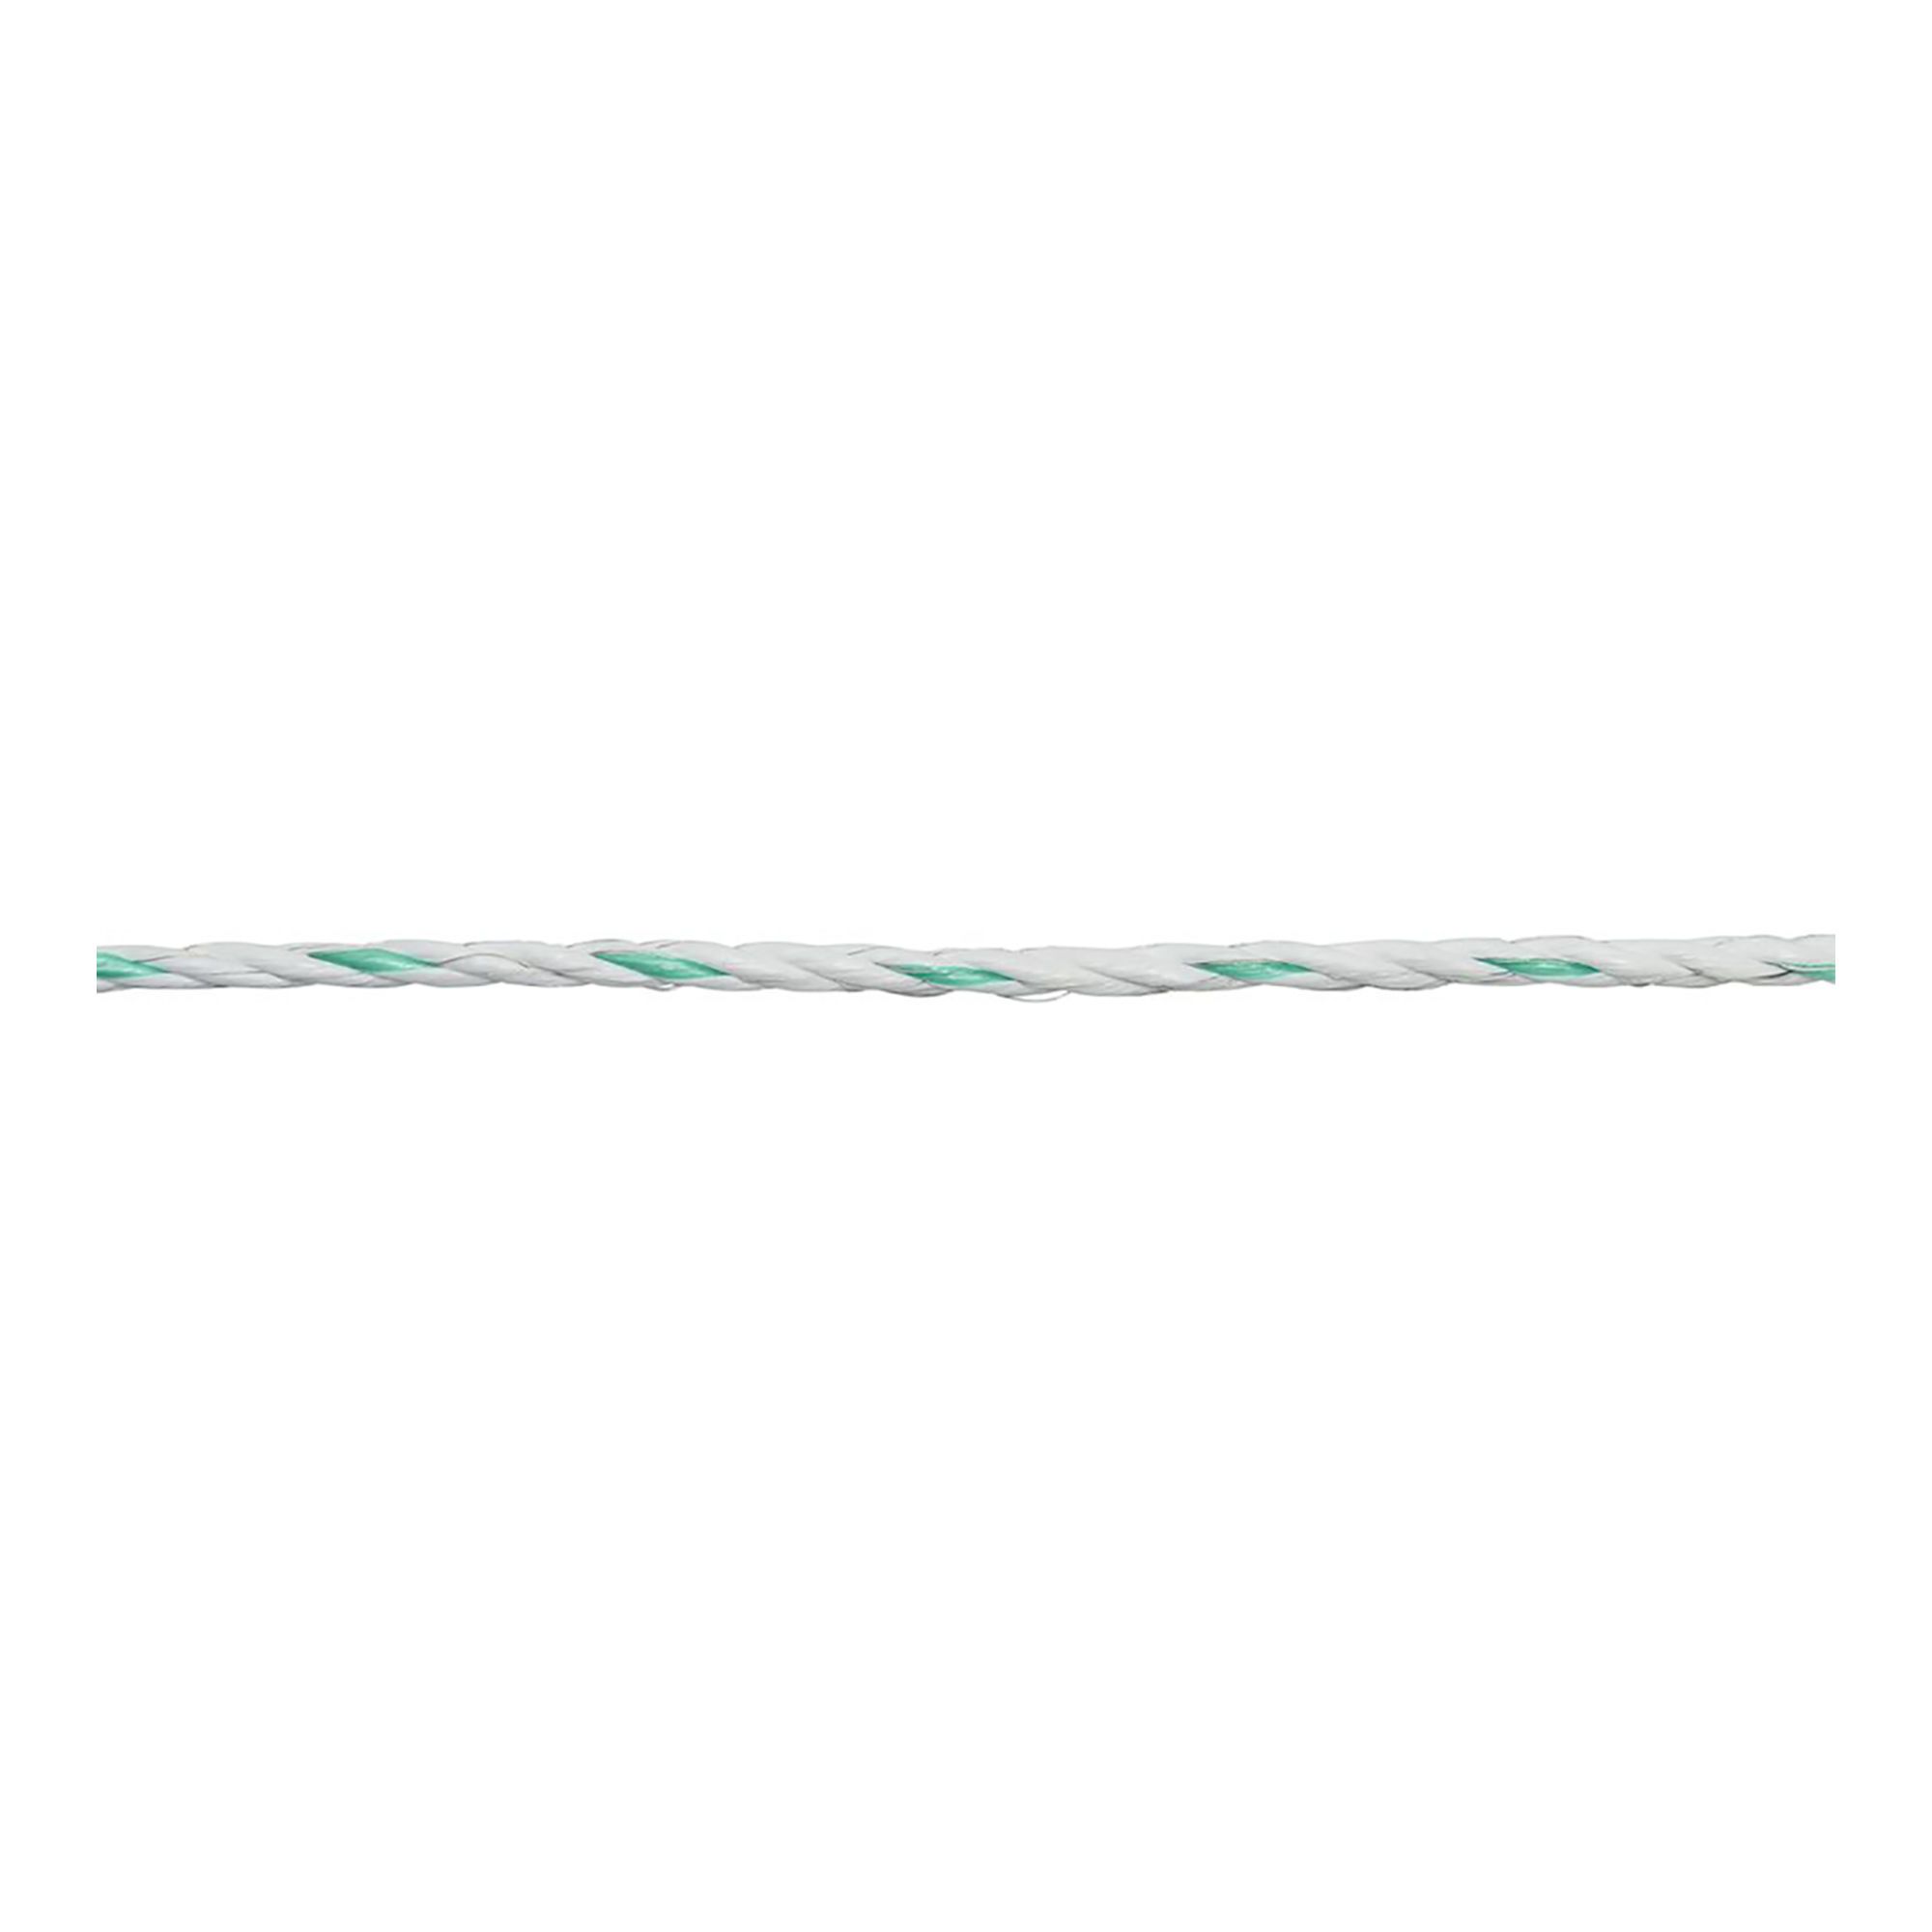 Premium Line Electribal Fence Rope - White/green - 400 kg - 200 m